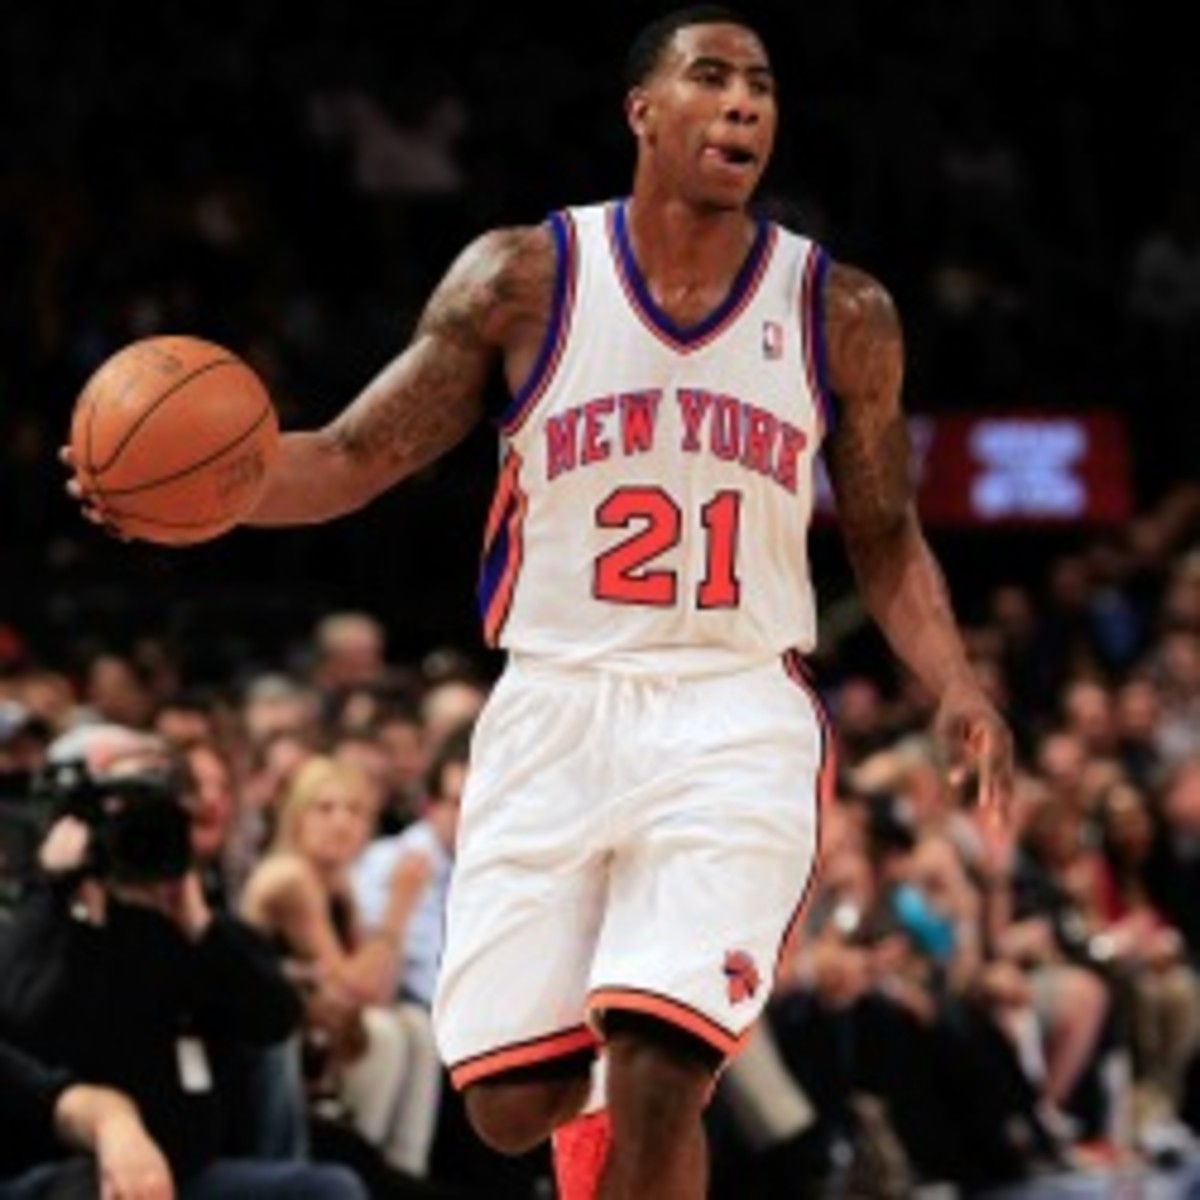 Trading Iman Shumpert is not happening says Knicks coach Mike Woodson.  (Chris Trotman/Getty Images)